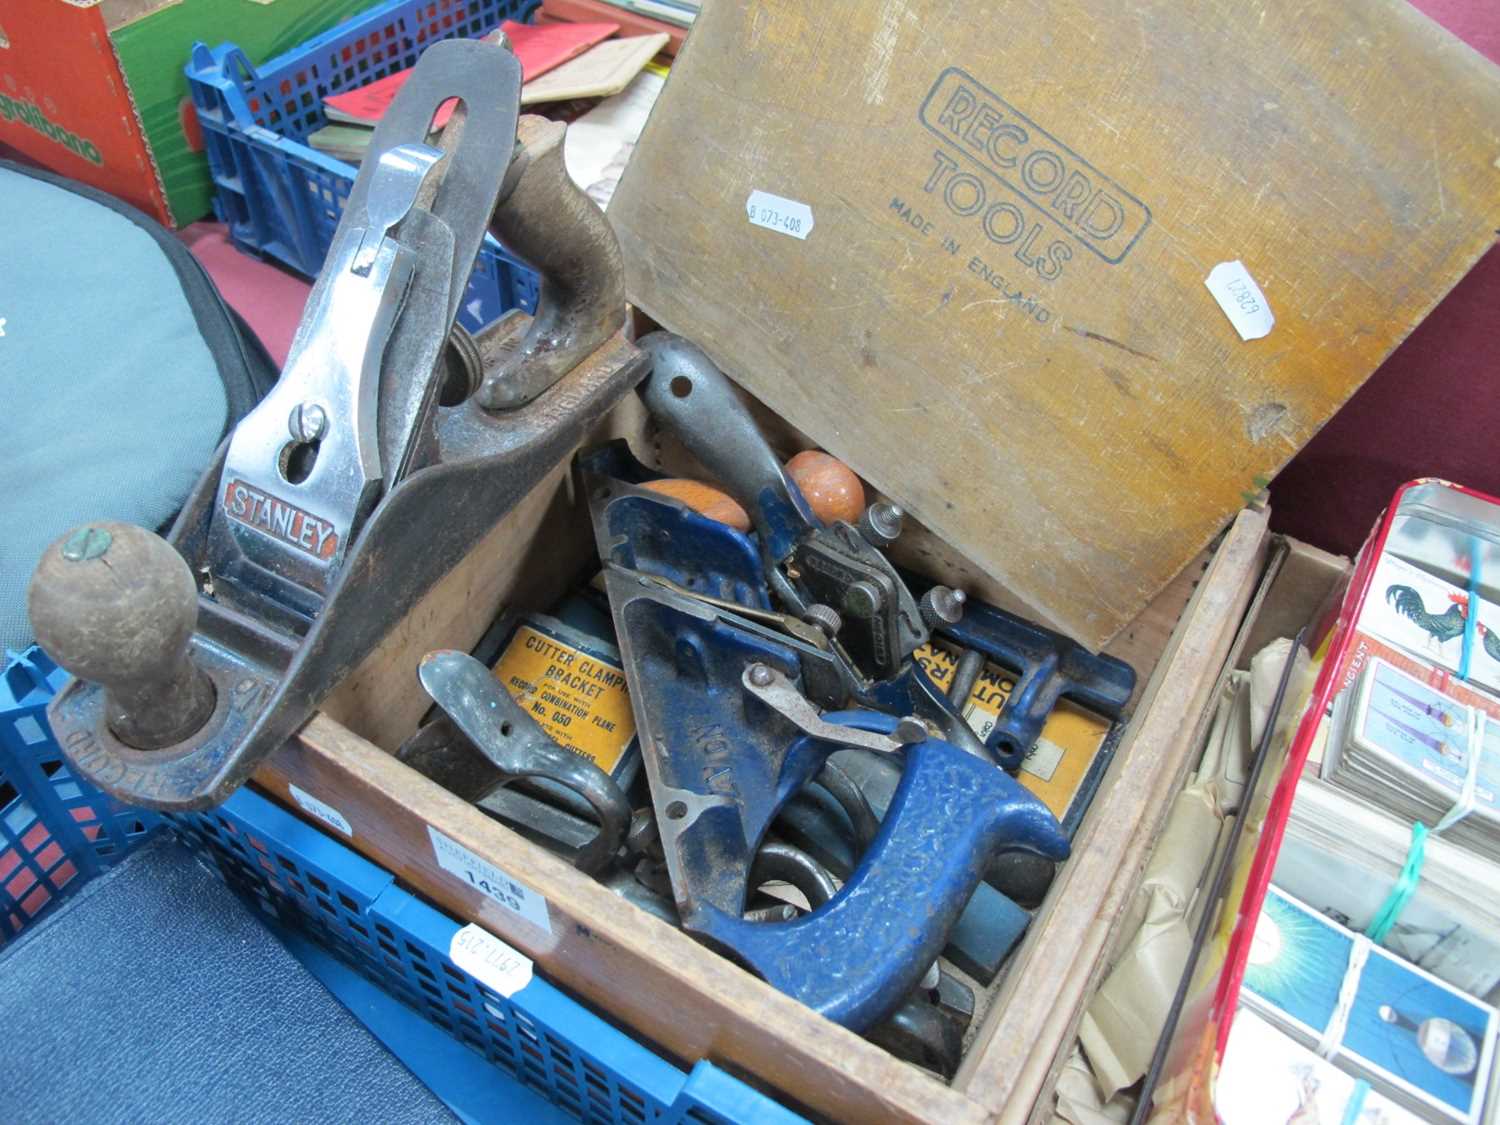 Record Tools Wooden Box, holding two planes, one Stanley, Record No. 4 and a W.S D'ham No. A78